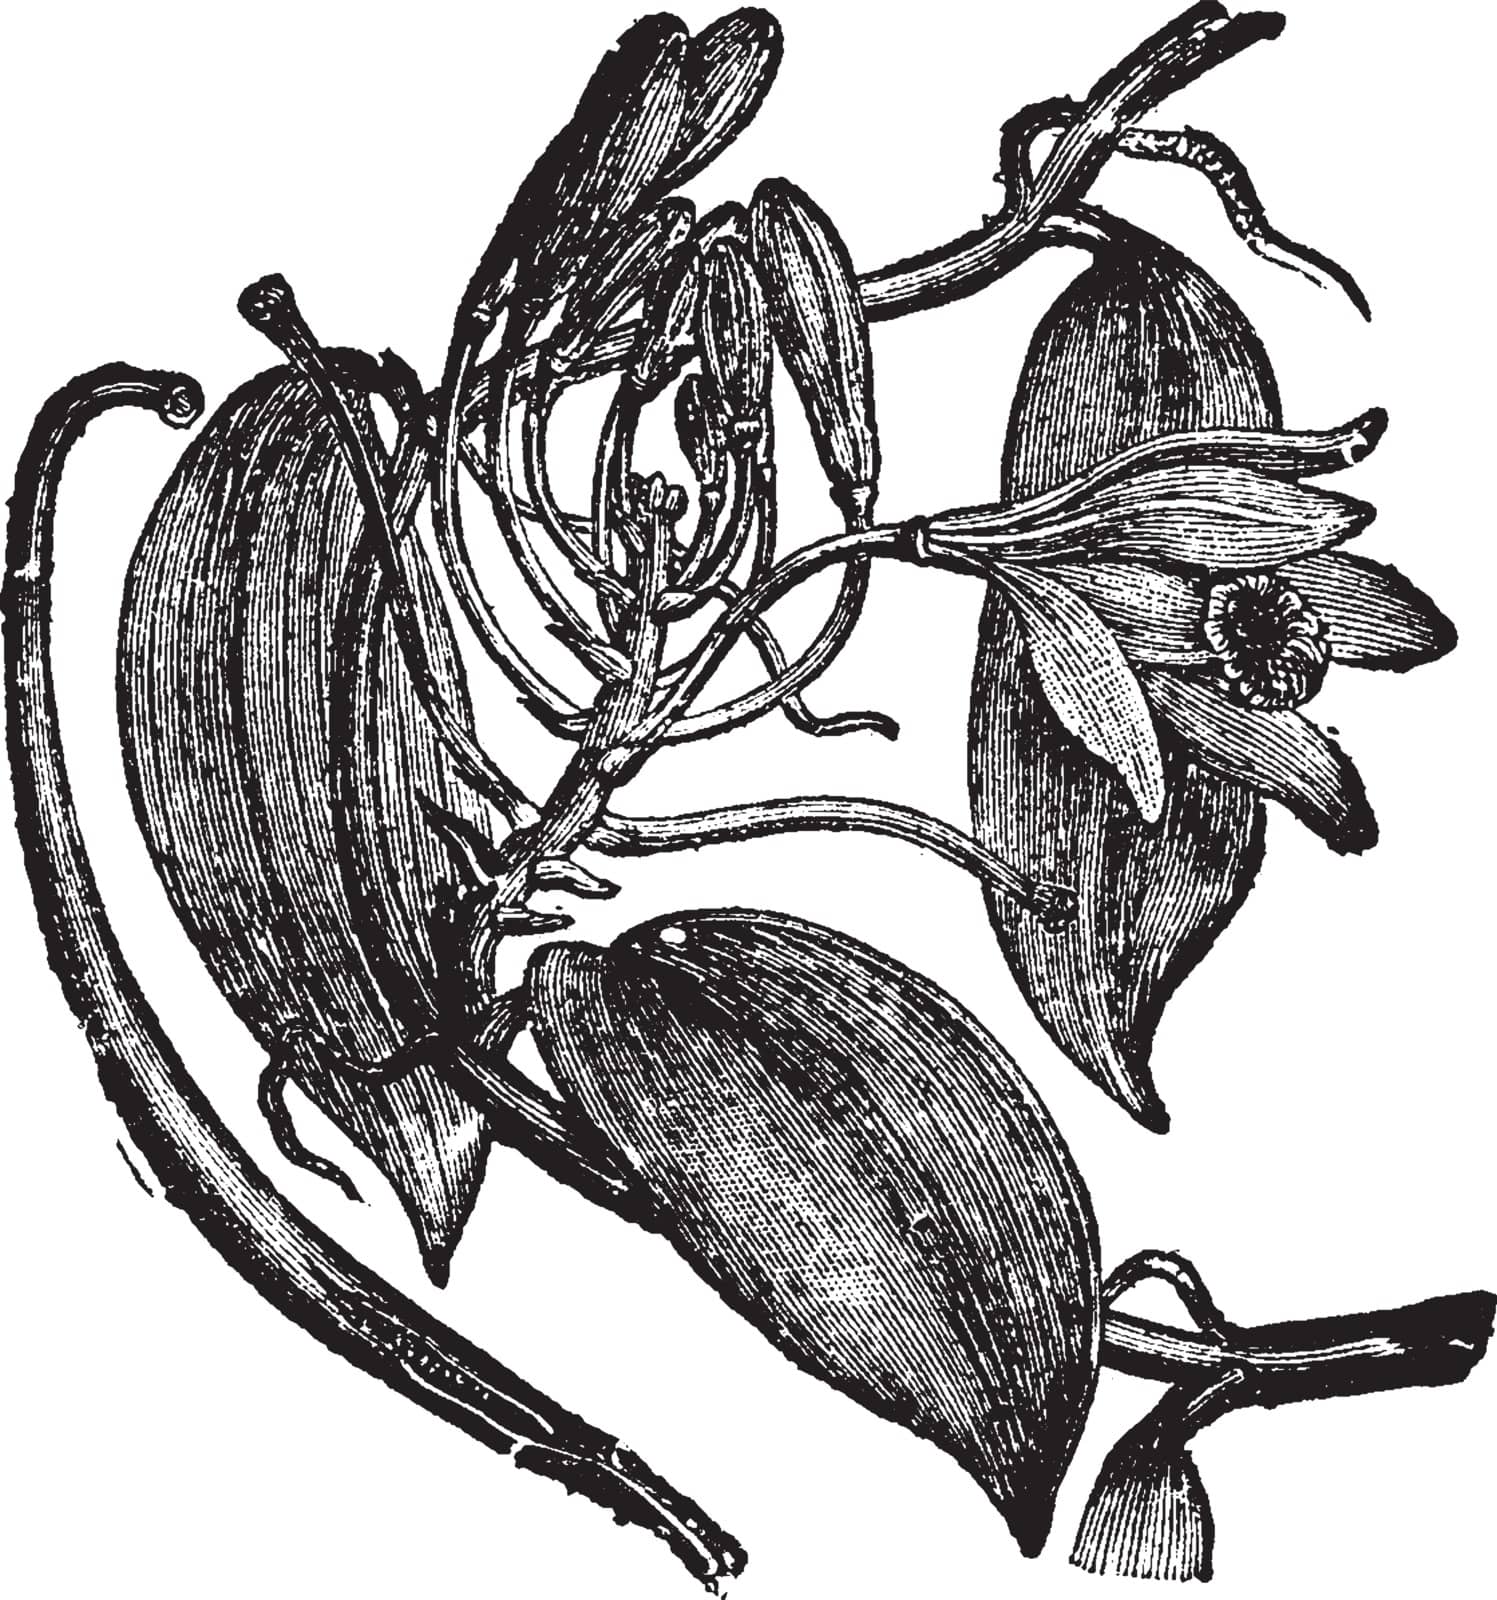 Vanilla planifolia is a species of vanilla orchid. Flowers are greenish-yellow, with a diameter of 5 cm. The plants are self-fertile, vintage line drawing or engraving illustration.